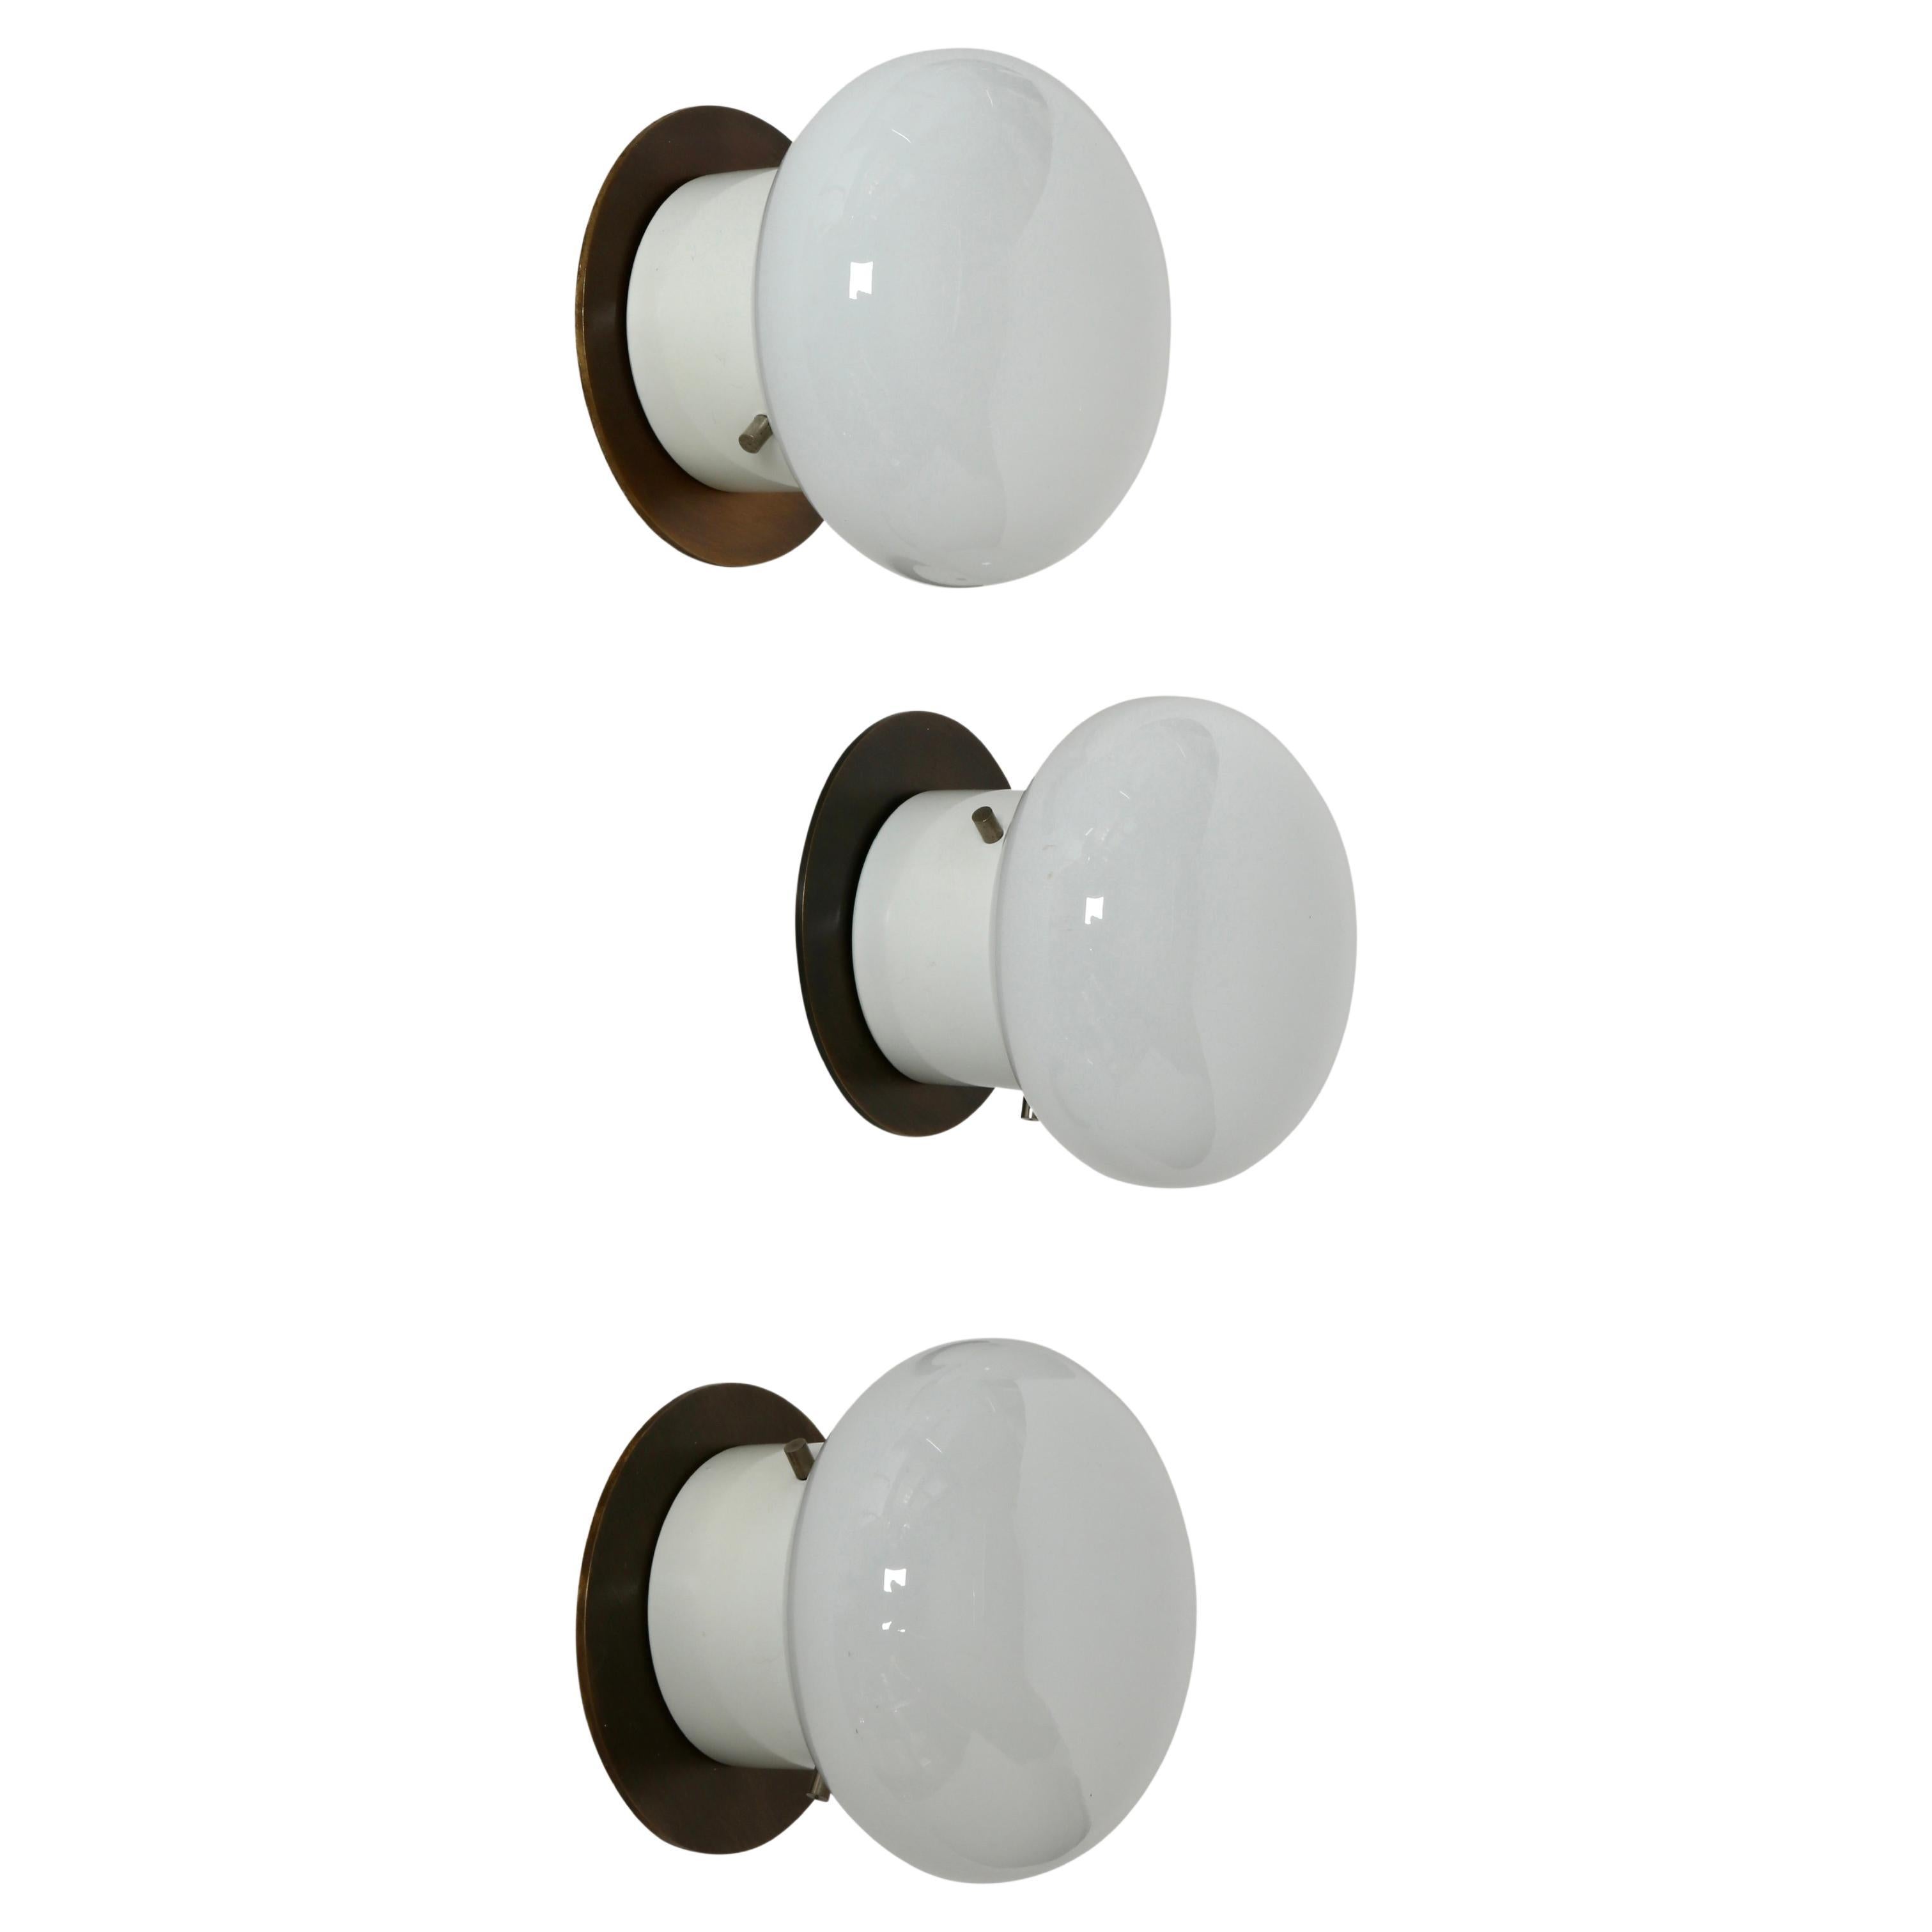 Valenti Wall Lights and Sconces